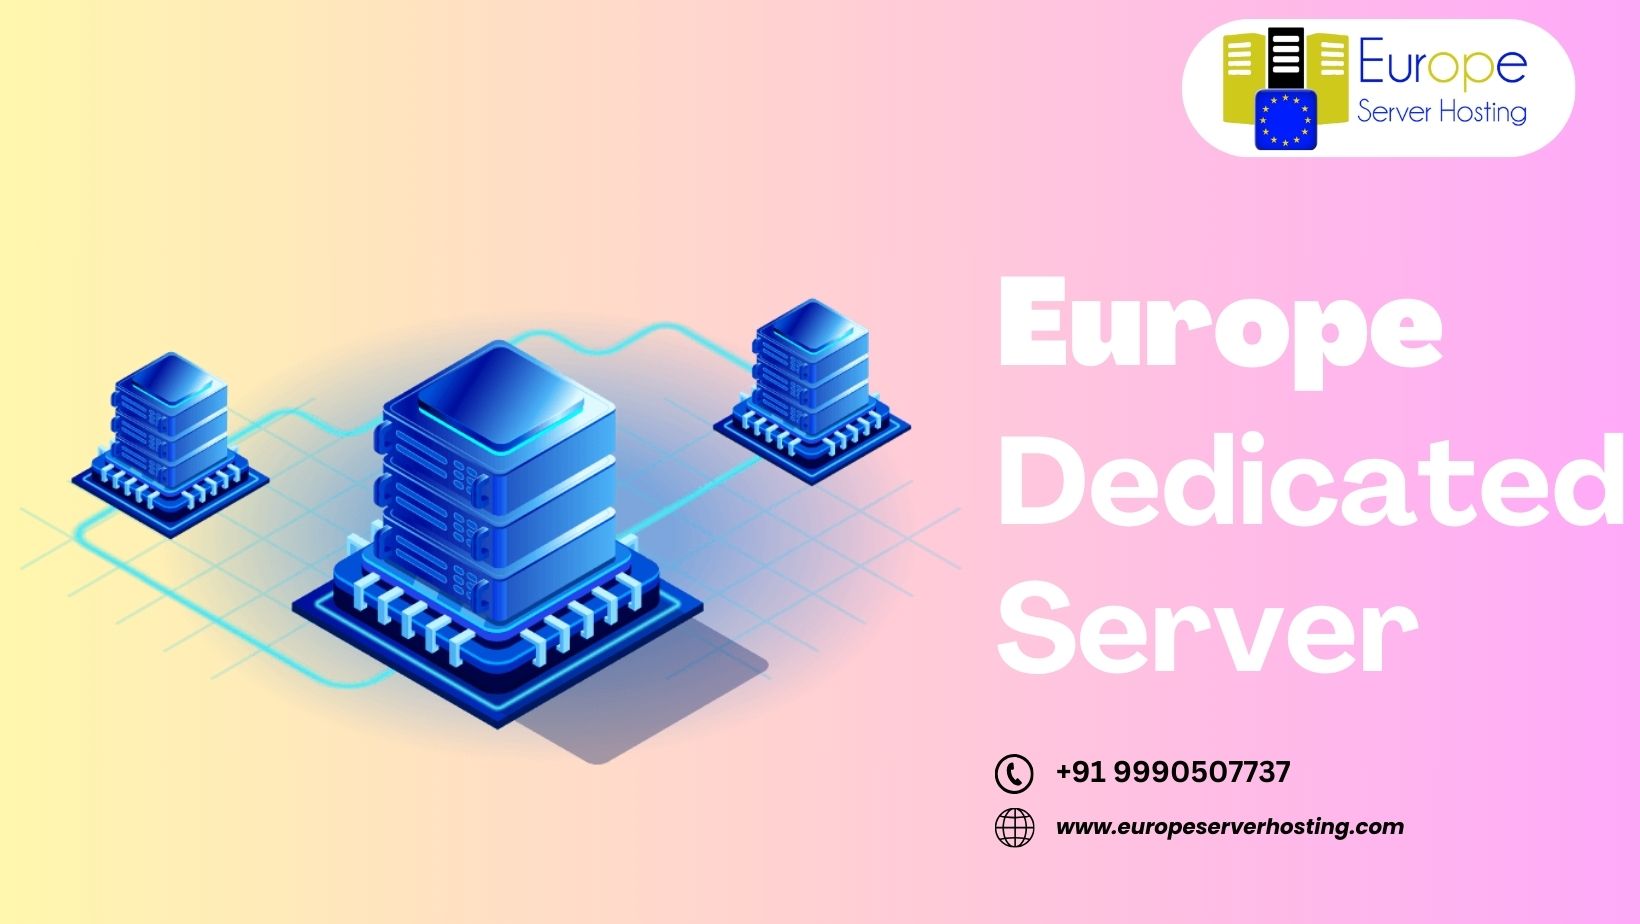 One of the primary benefits of choosing Europe-based dedicated servers for your e-commerce site is the proximity to your target audience. By hosting your website in Europe, you can ensure low latency and faster loading times for European customers.